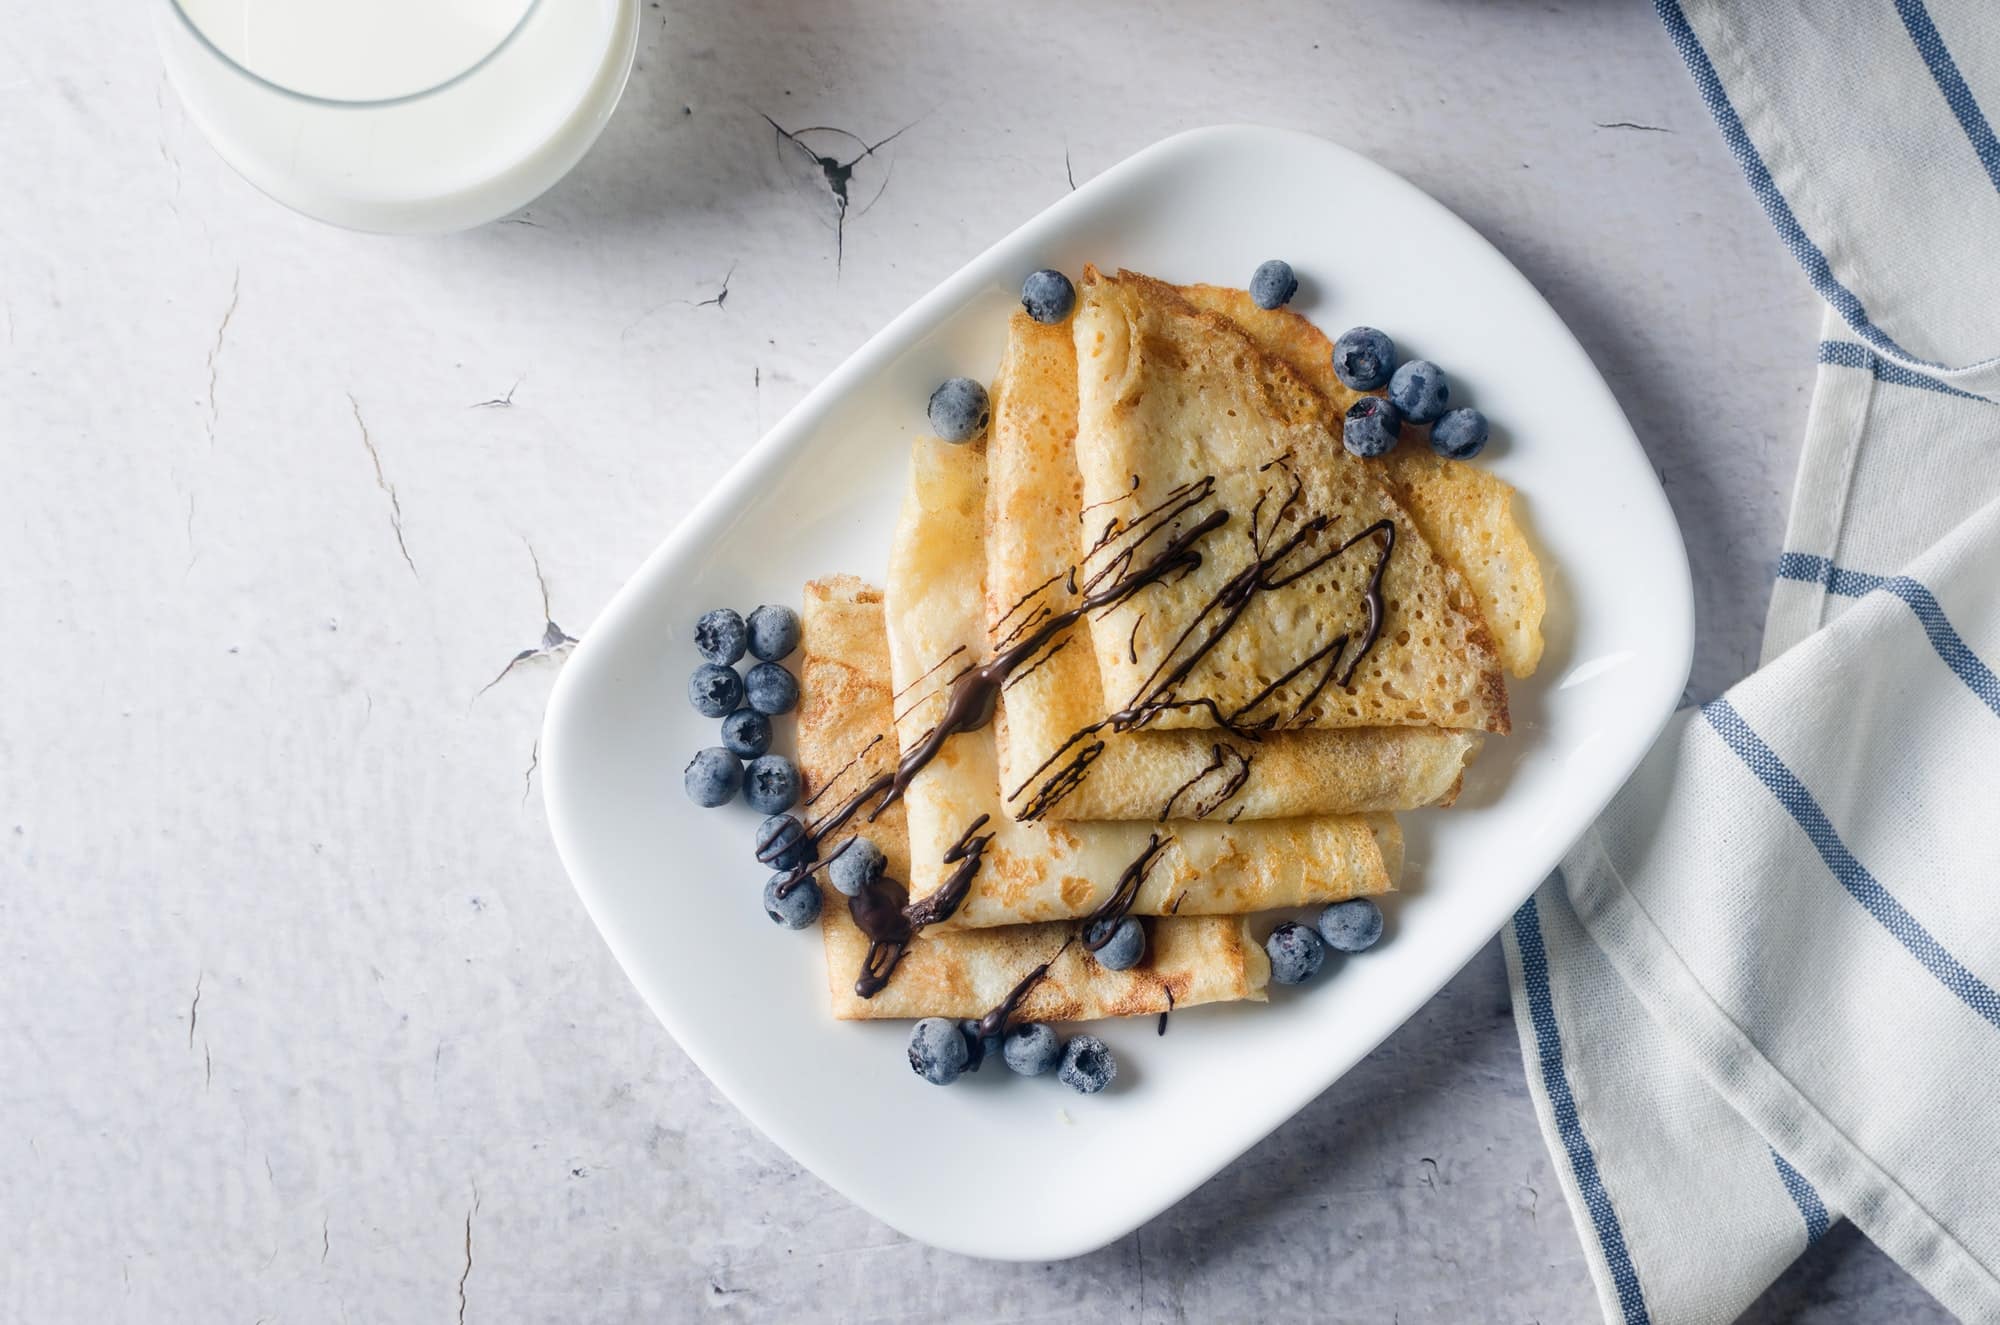 Thin homemade pancakes with berries, traditional Polish cuisine.